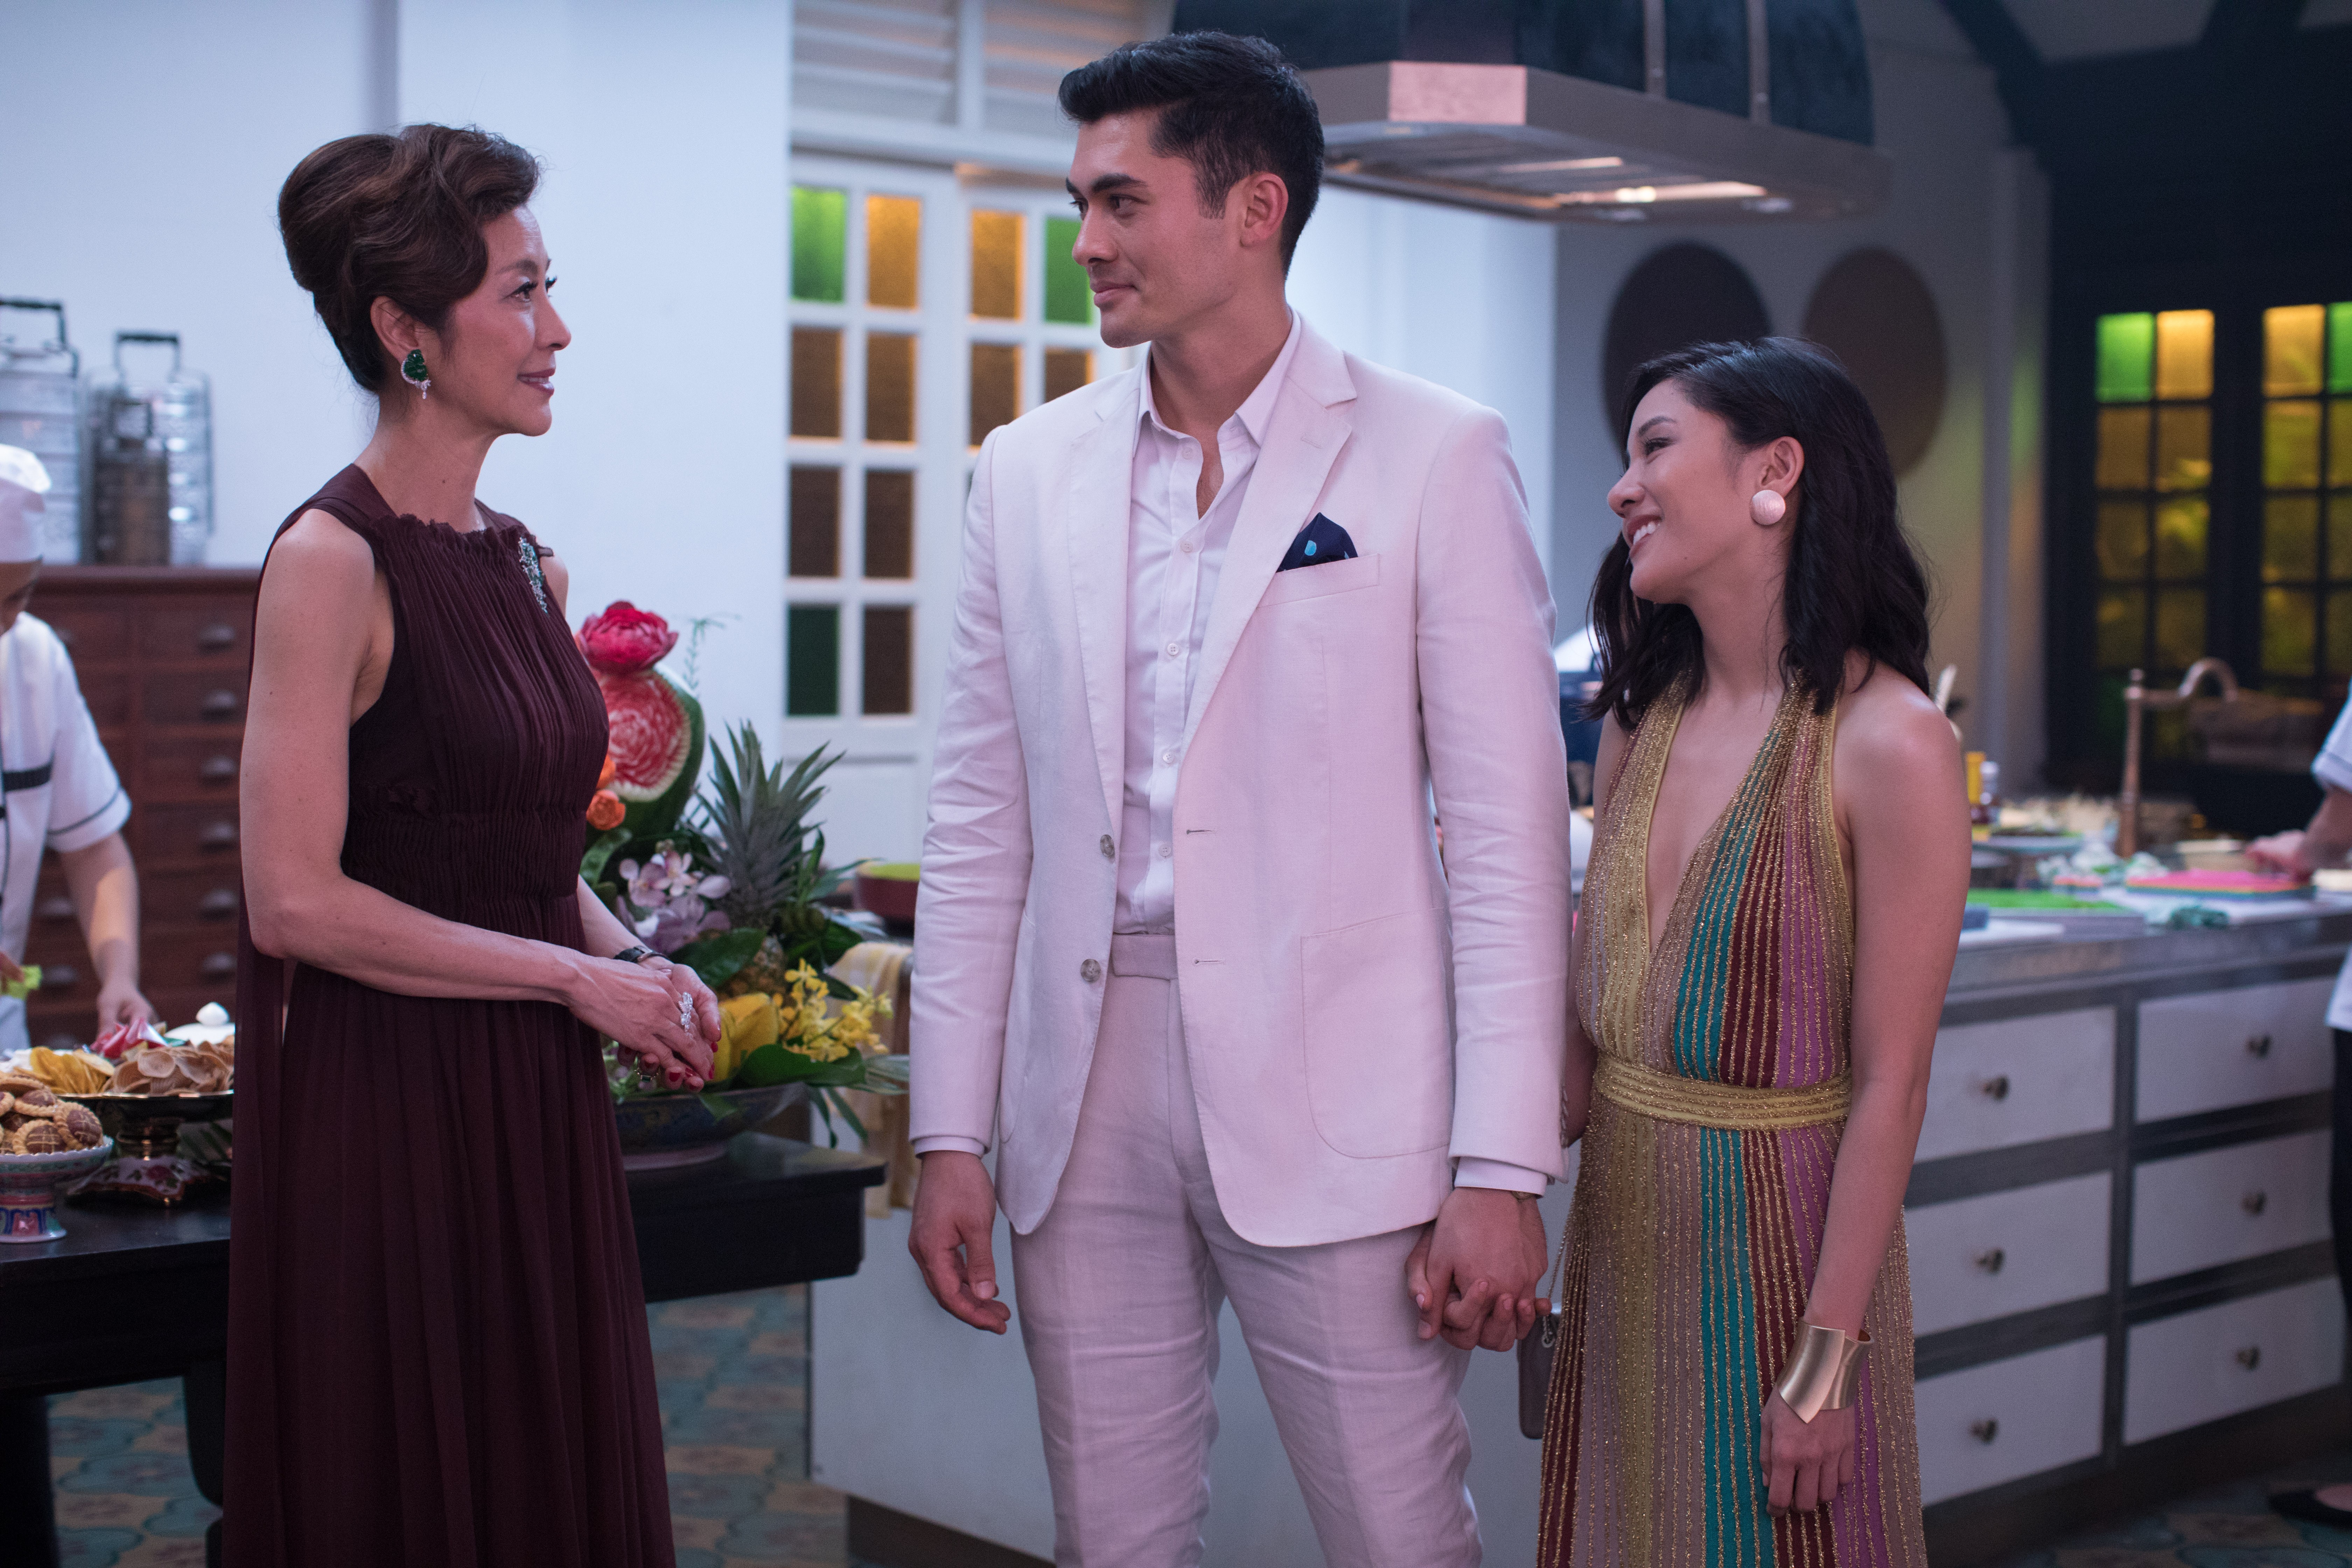 Veteran Malaysian actress Michelle Yeoh (left), also stars in the movie alongside Henry Golding and Constance Wu.